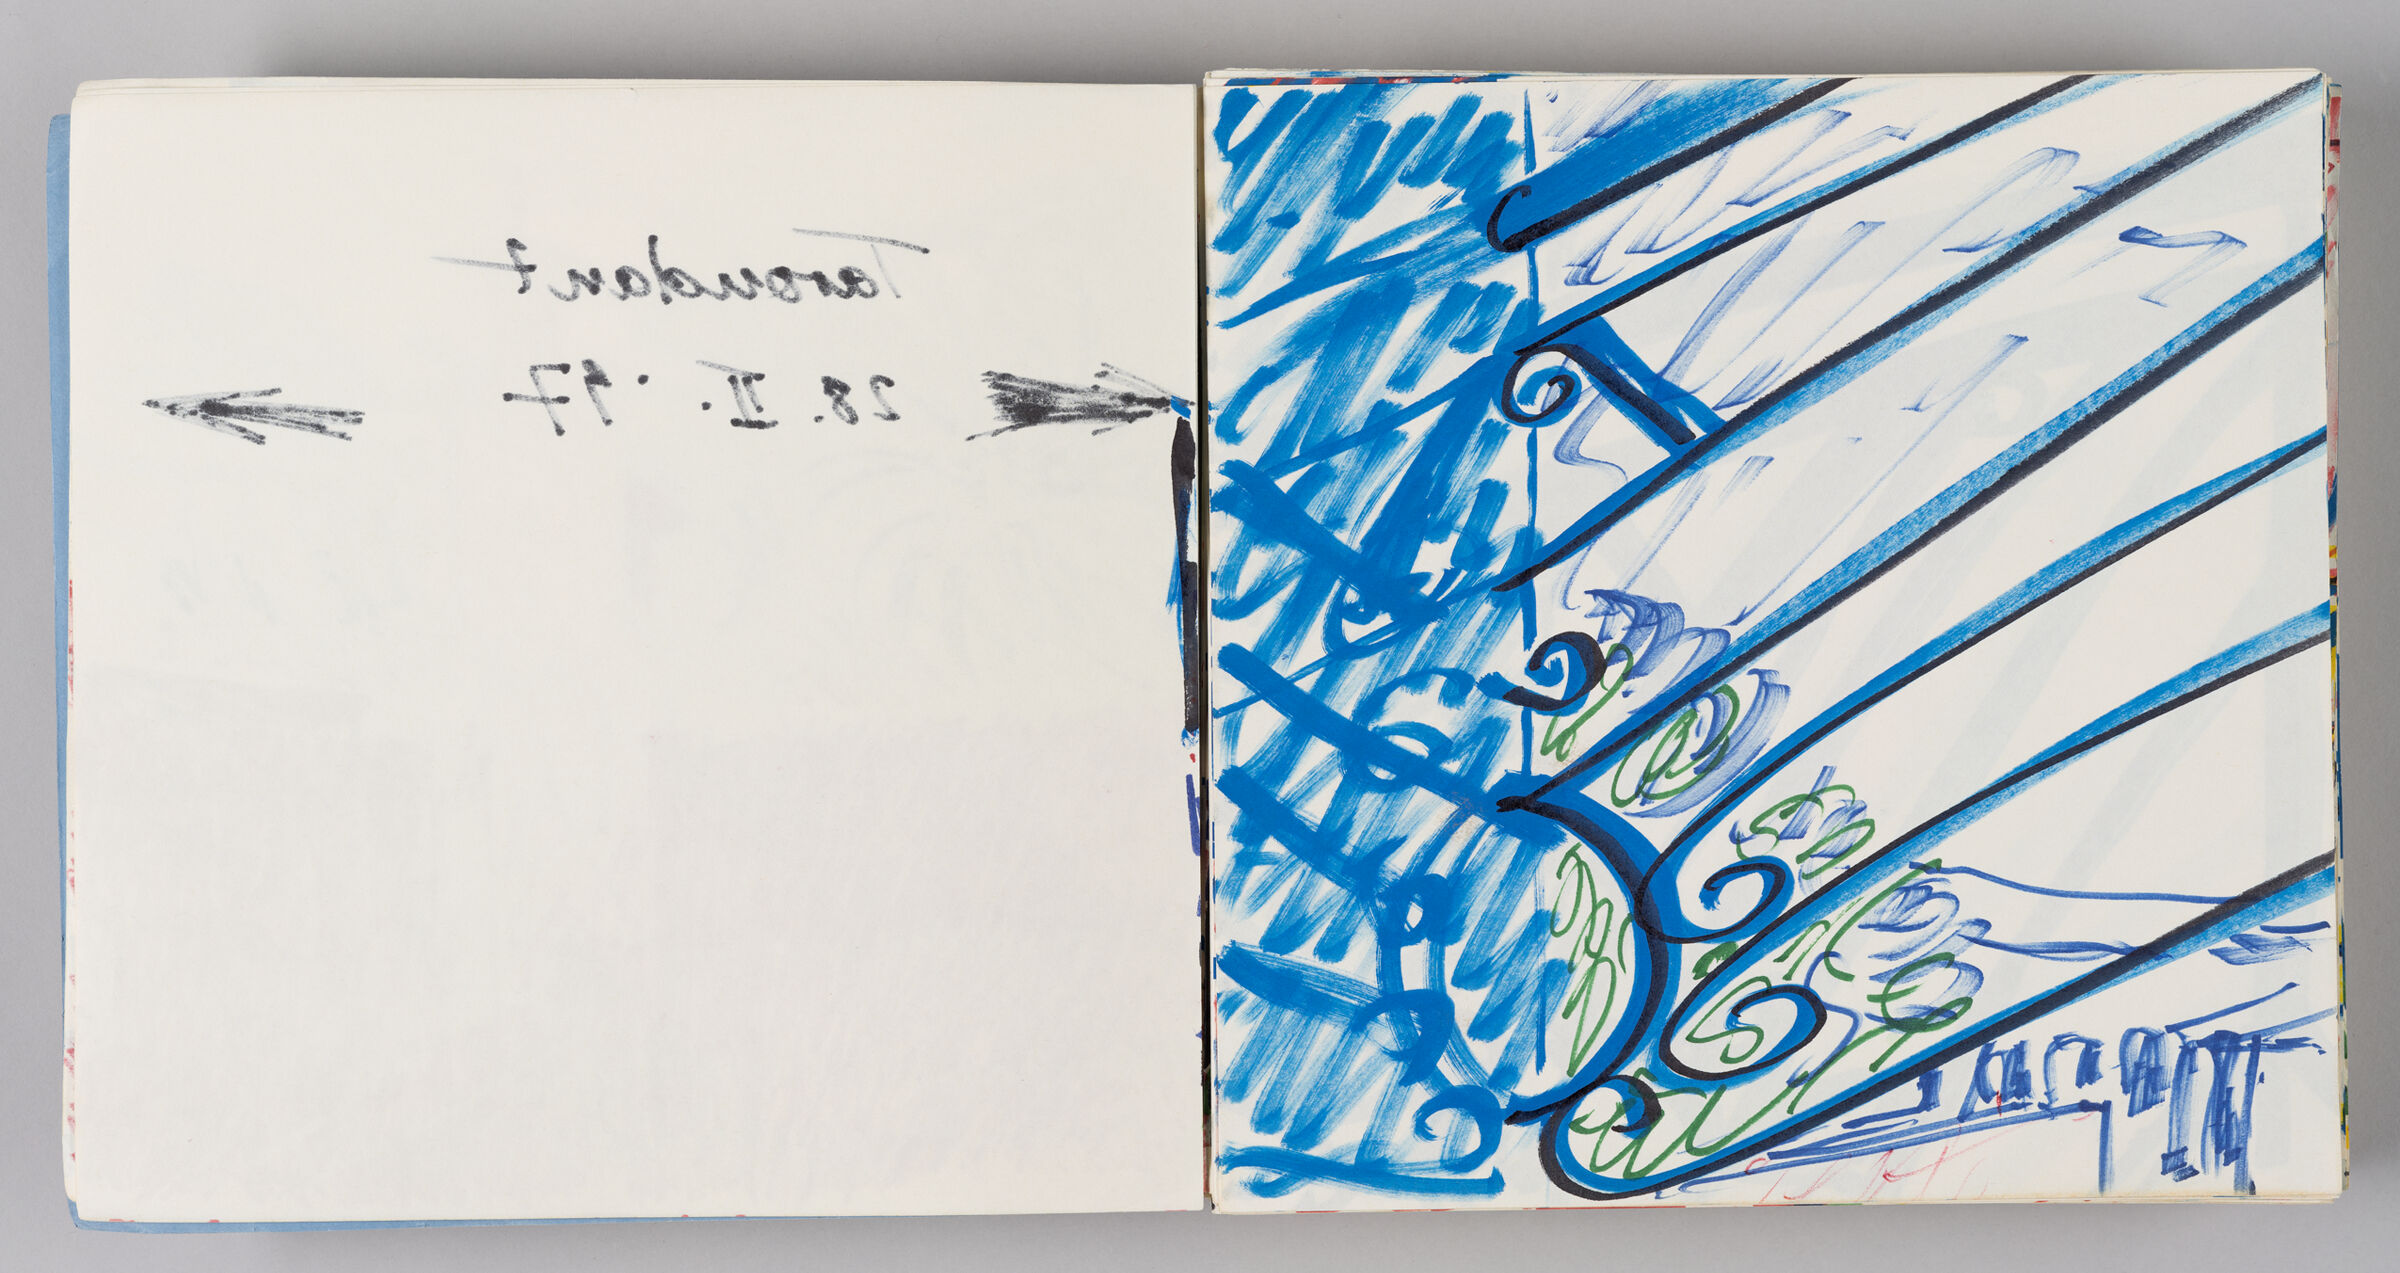 Untitled (Bleed-Through Of Previous Page, Left Page); Untitled (Detail Of Railing, Right Page)